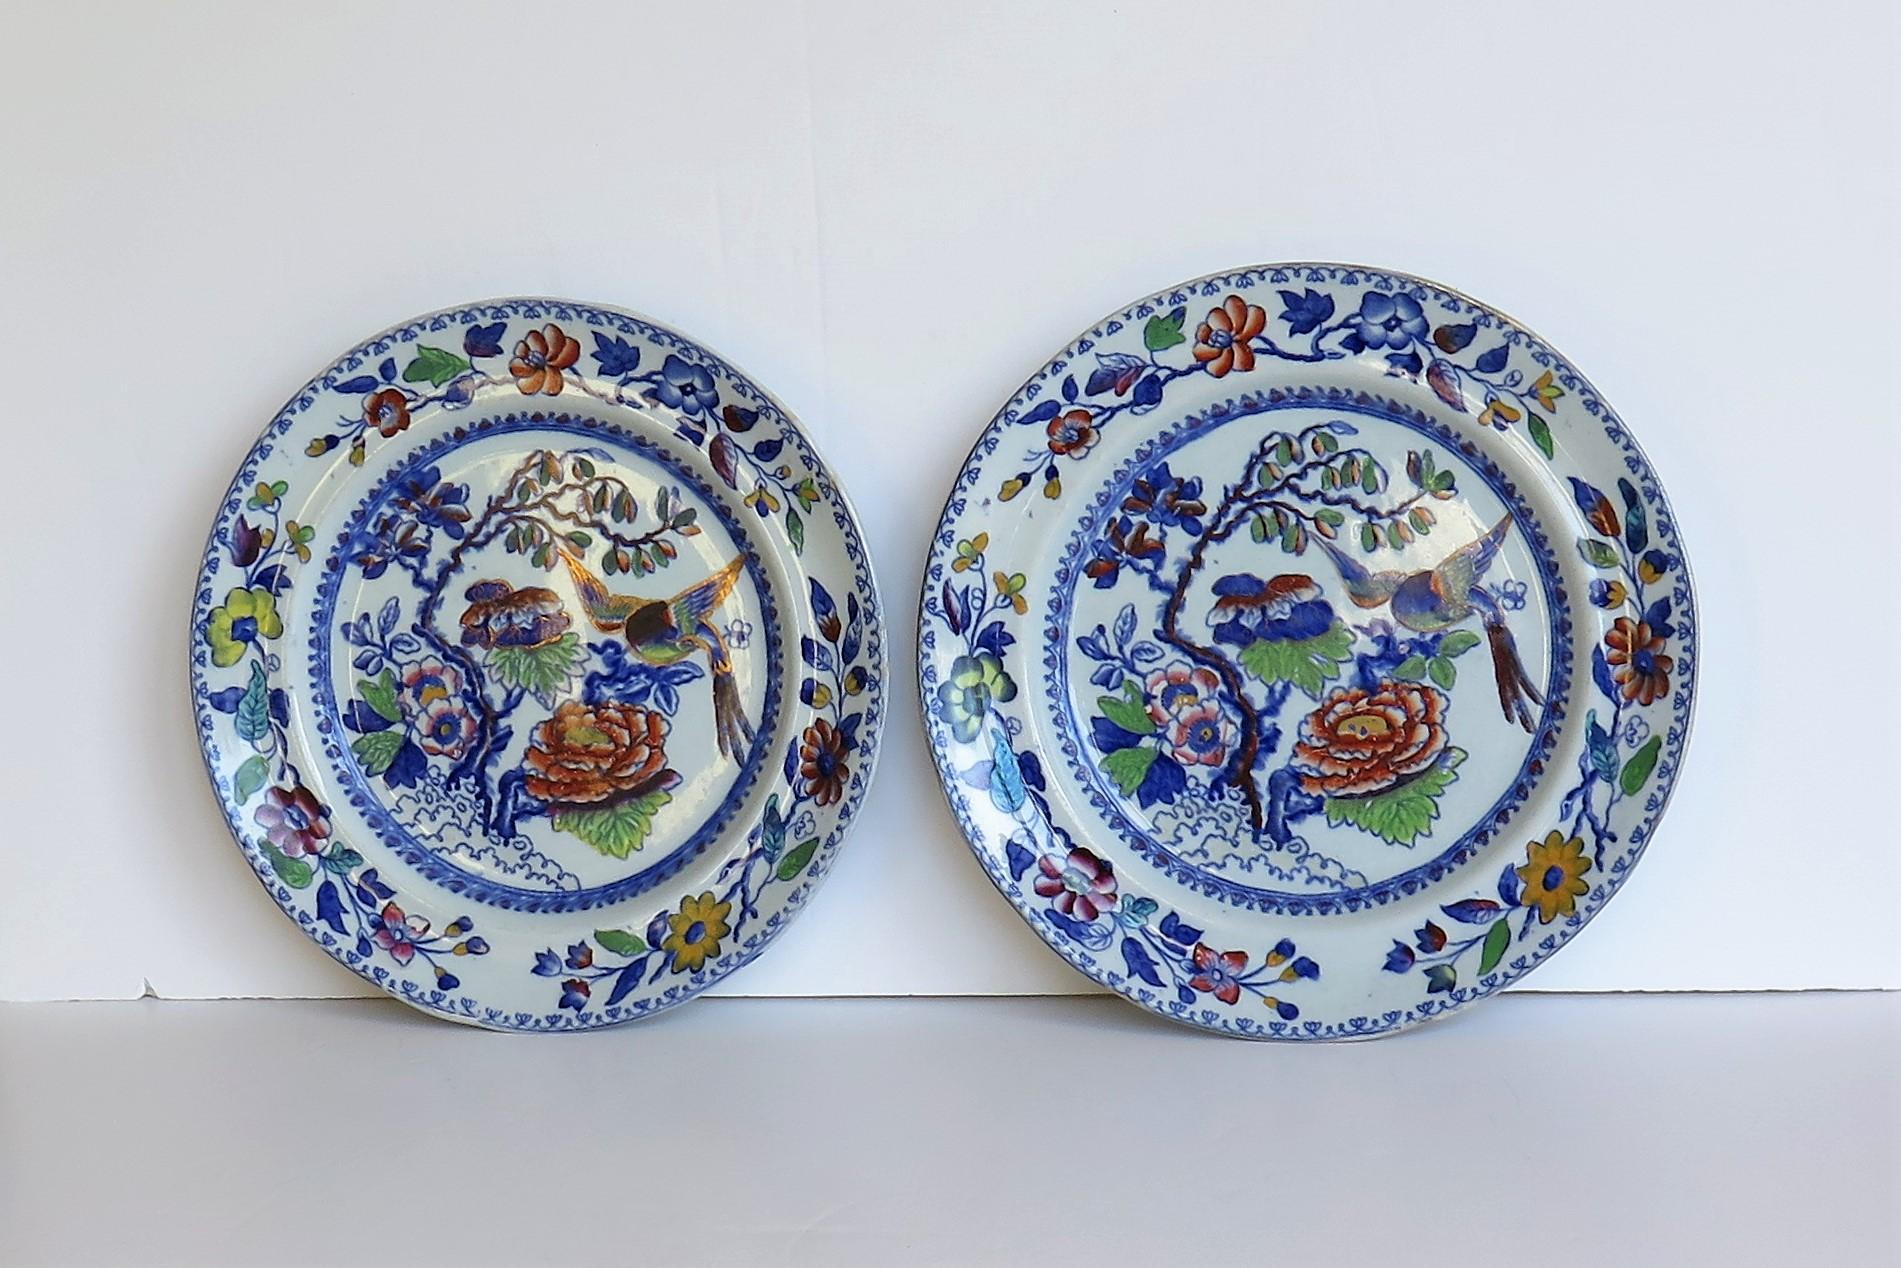 These are a very good pair of finely hand enameled, Mason’s ironstone plates produced at the time when Mason's was owned and controlled by George L Ashworth and Brothers after the bankruptcy of C J Mason in 1848.

Each plate is circular in shape